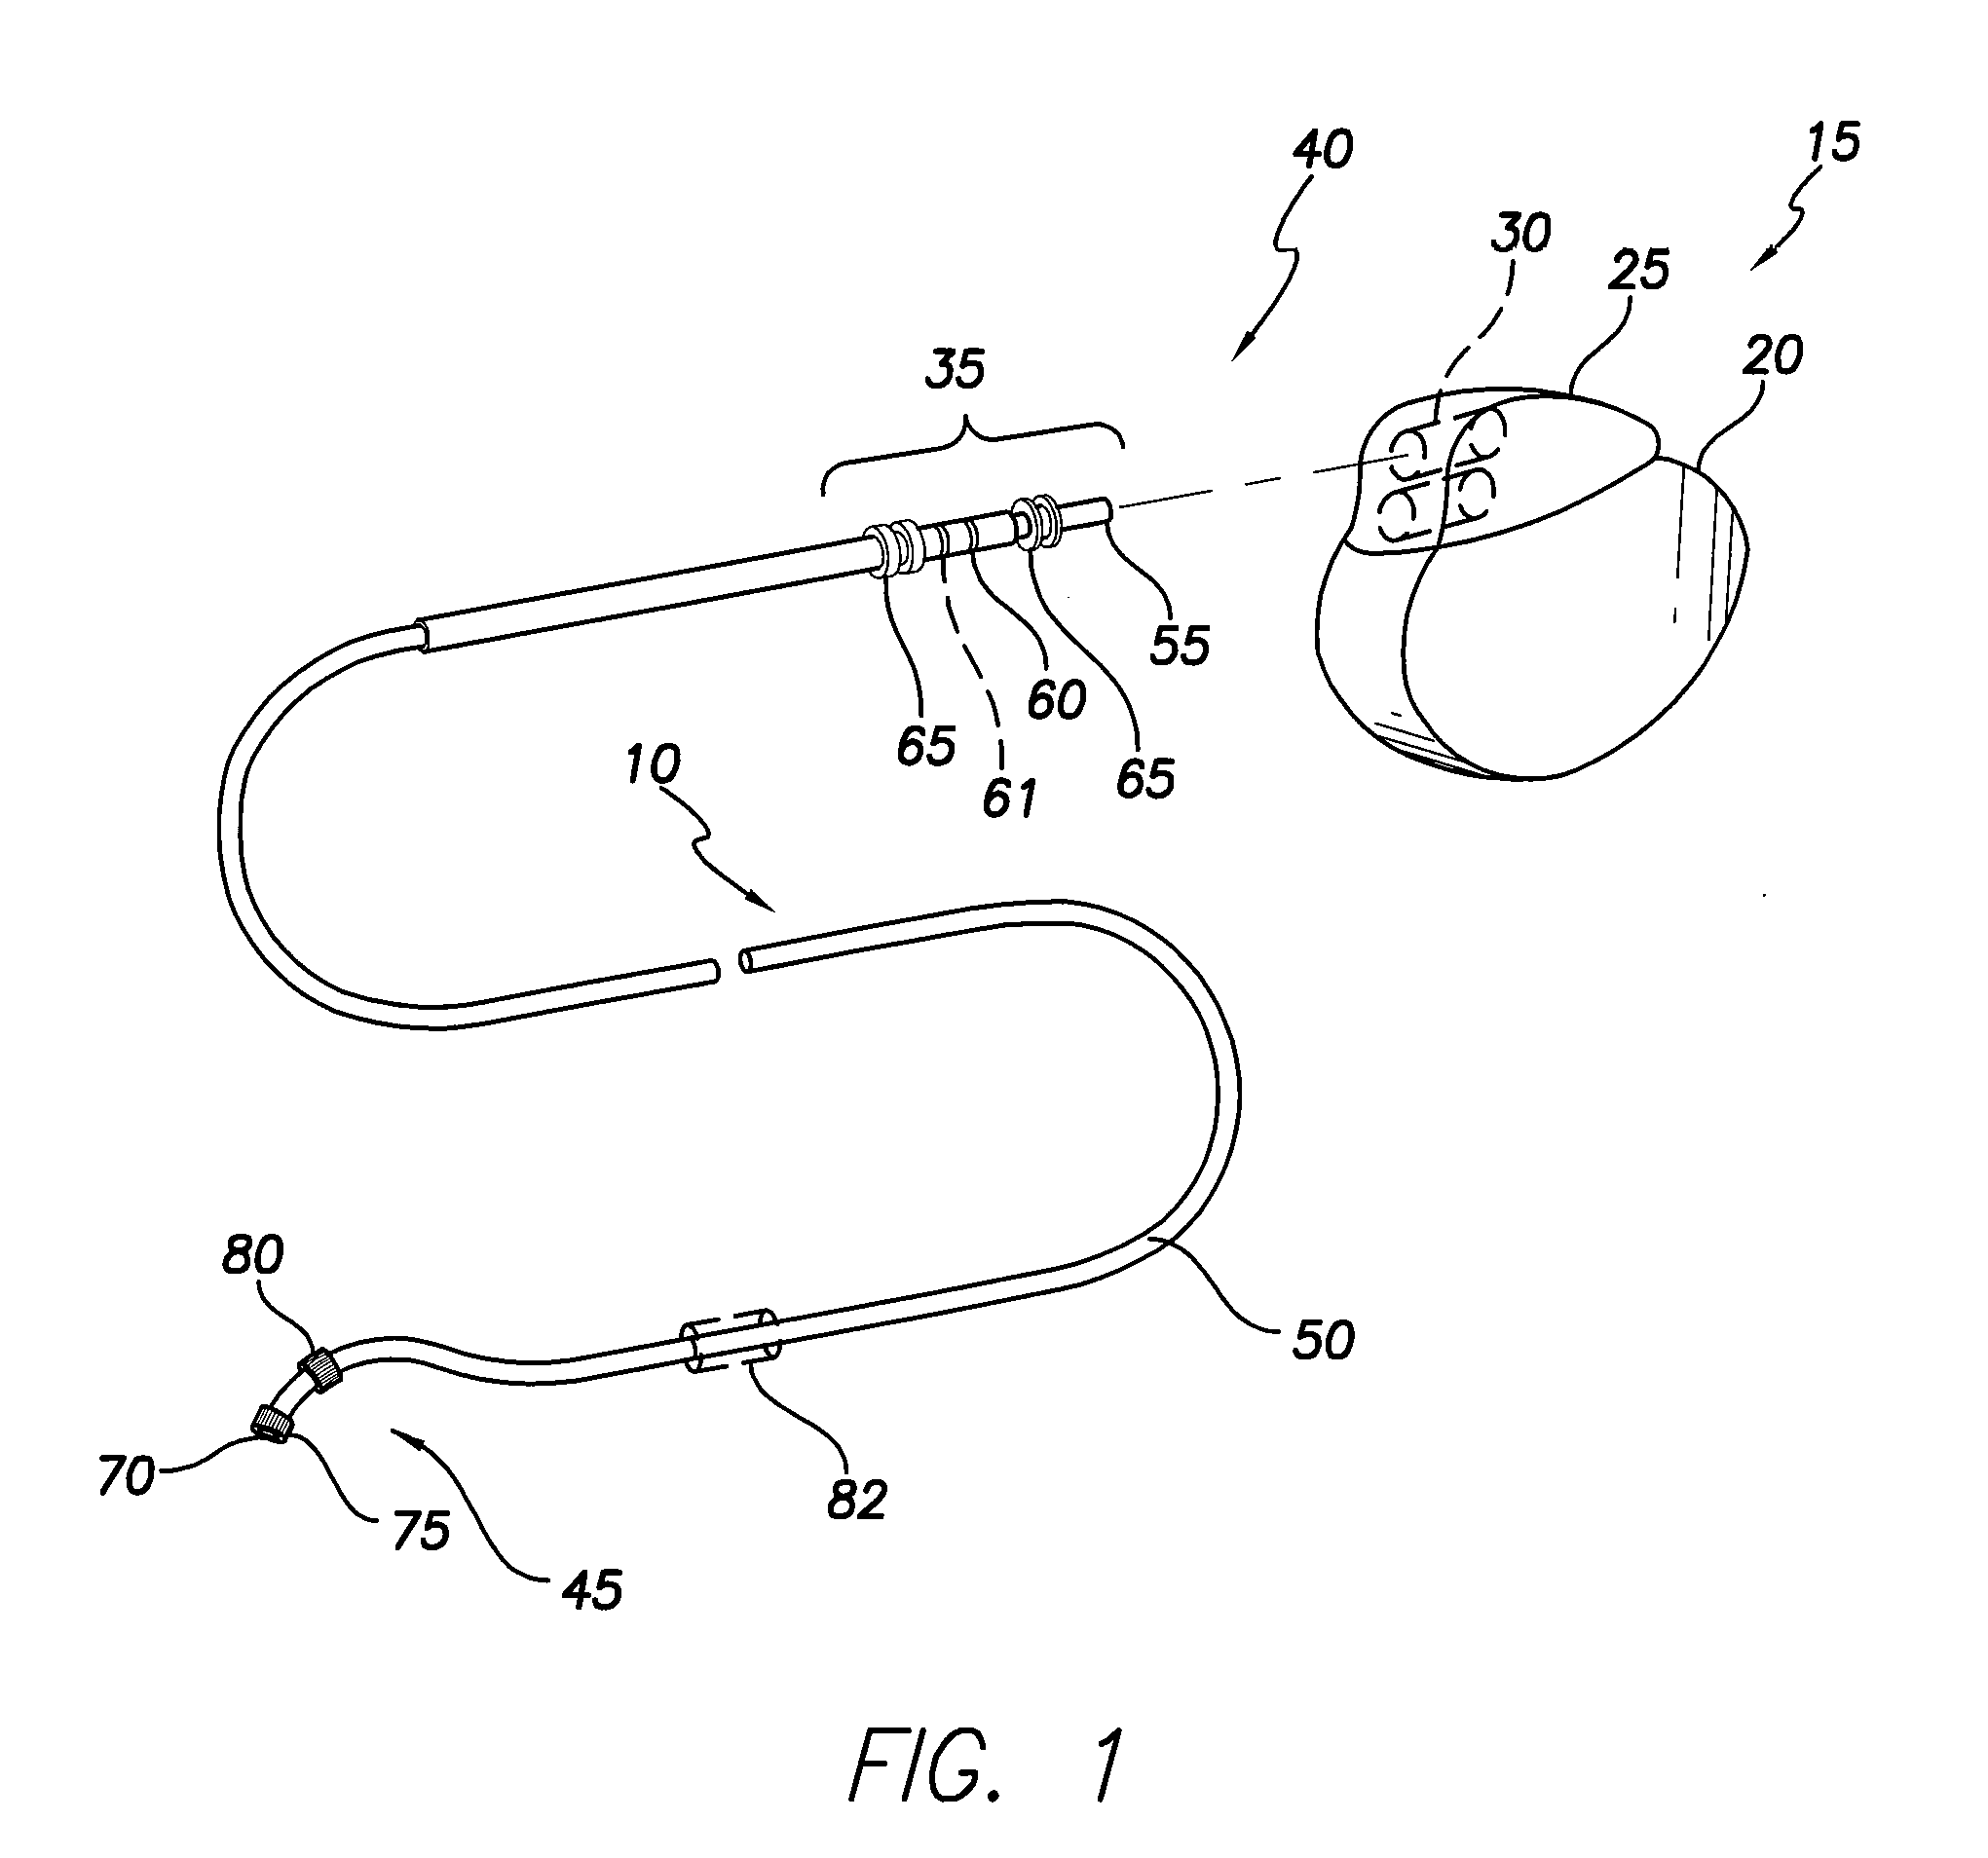 MRI compatible implantable medical lead and method of making same